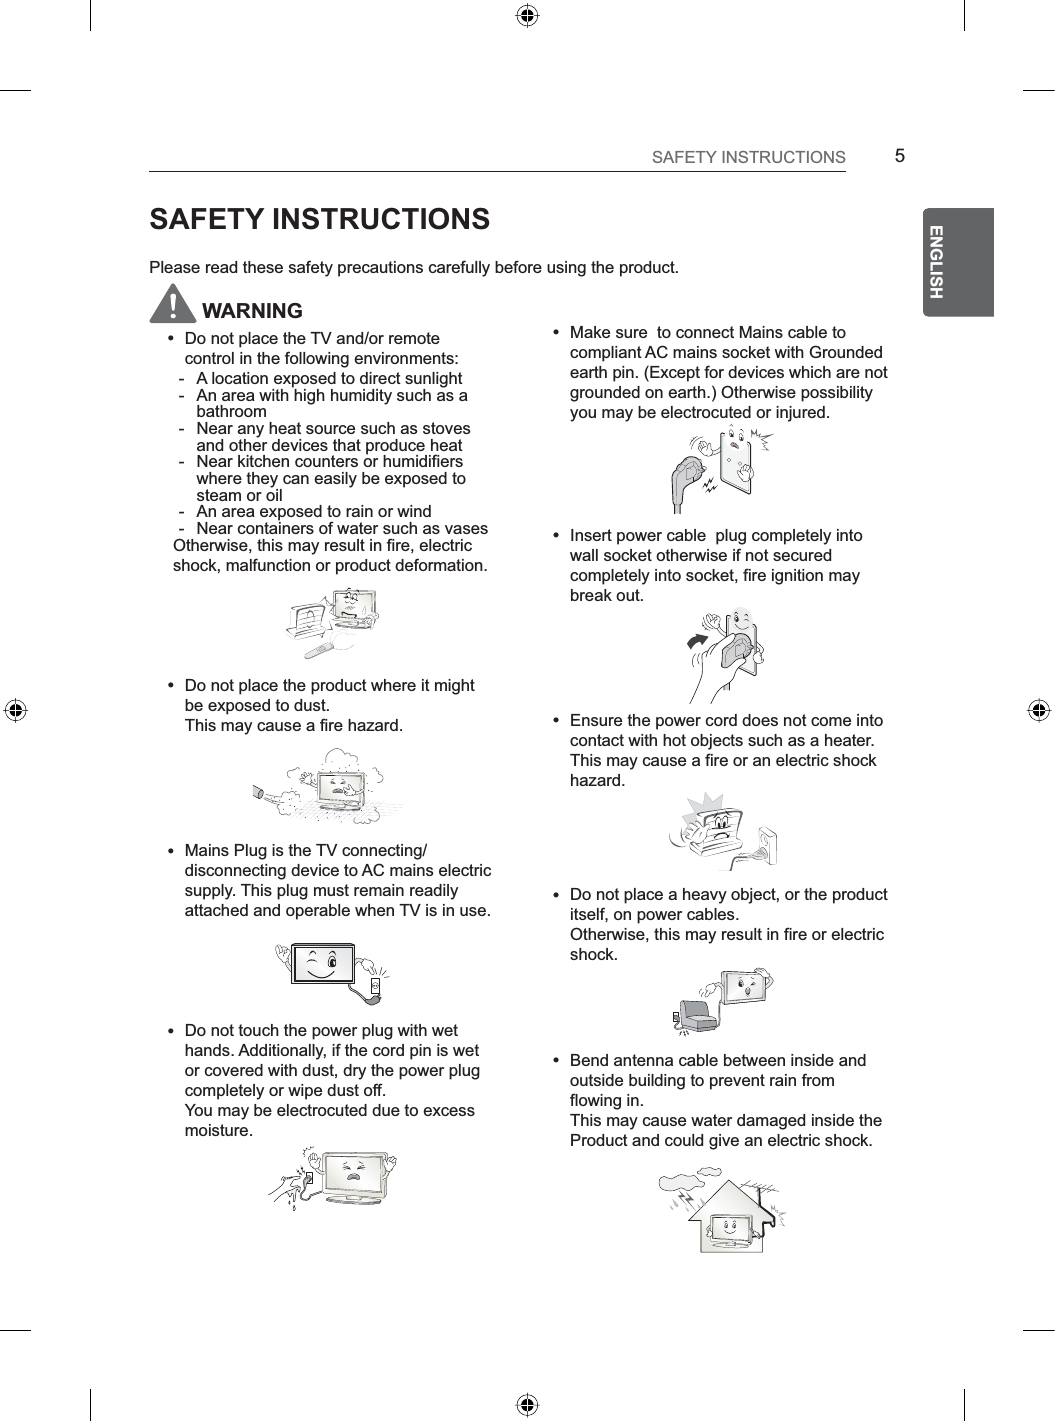 5ENGENGLISHSAFETY INSTRUCTIONSSAFETY INSTRUCTIONSPlease read these safety precautions carefully before using the product. WARNINGyDo not place the TV and/or remote control in the following environments:- A location exposed to direct sunlight- An area with high humidity such as a bathroom- Near any heat source such as stoves and other devices that produce heat- Near kitchen counters or humidifiers where they can easily be exposed to steam or oil- An area exposed to rain or wind- Near containers of water such as vasesOtherwise, this may result in fire, electric shock, malfunction or product deformation.yDo not place the product where it might be exposed to dust. This may cause a fire hazard.yMains Plug is the TV connecting/disconnecting device to AC mains electric supply. This plug must remain readily attached and operable when TV is in use.yDo not touch the power plug with wet hands. Additionally, if the cord pin is wet or covered with dust, dry the power plug completely or wipe dust off. You may be electrocuted due to excess moisture.yMake sure  to connect Mains cable to compliant AC mains socket with Grounded earth pin. (Except for devices which are not grounded on earth.) Otherwise possibilityyou may be electrocuted or injured.yInsert power cable  plug completely into wall socket otherwise if not secured completely into socket, fire ignition may break out.yEnsure the power cord does not come into contact with hot objects such as a heater. This may cause a fire or an electric shock hazard.yDo not place a heavy object, or the product itself, on power cables. Otherwise, this may result in fire or electric shock.yBend antenna cable between inside and outside building to prevent rain from flowing in. This may cause water damaged inside the Product and could give an electric shock.